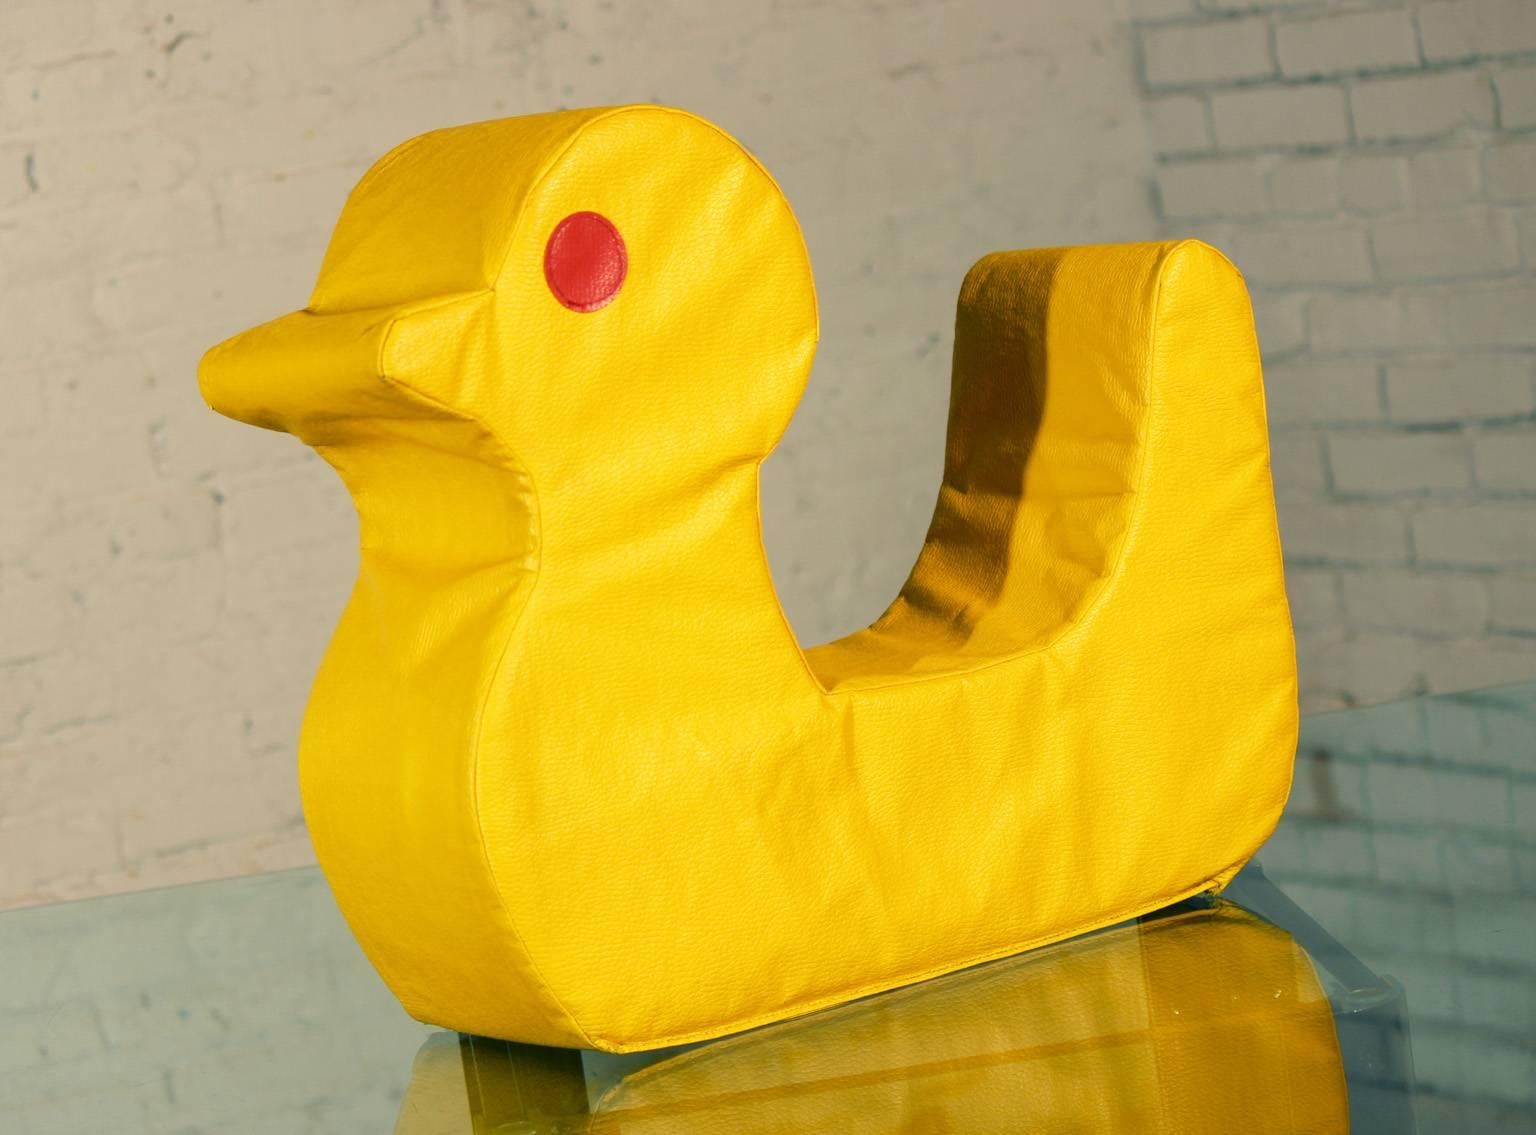 Awesome Mid-Century pop art yellow duck pillow, cushion or child's seat. In great vintage condition. A couple tiny seam stress tears as you would expect with age.

Just Ducky but this one is too large to take in the bath with you!! What a